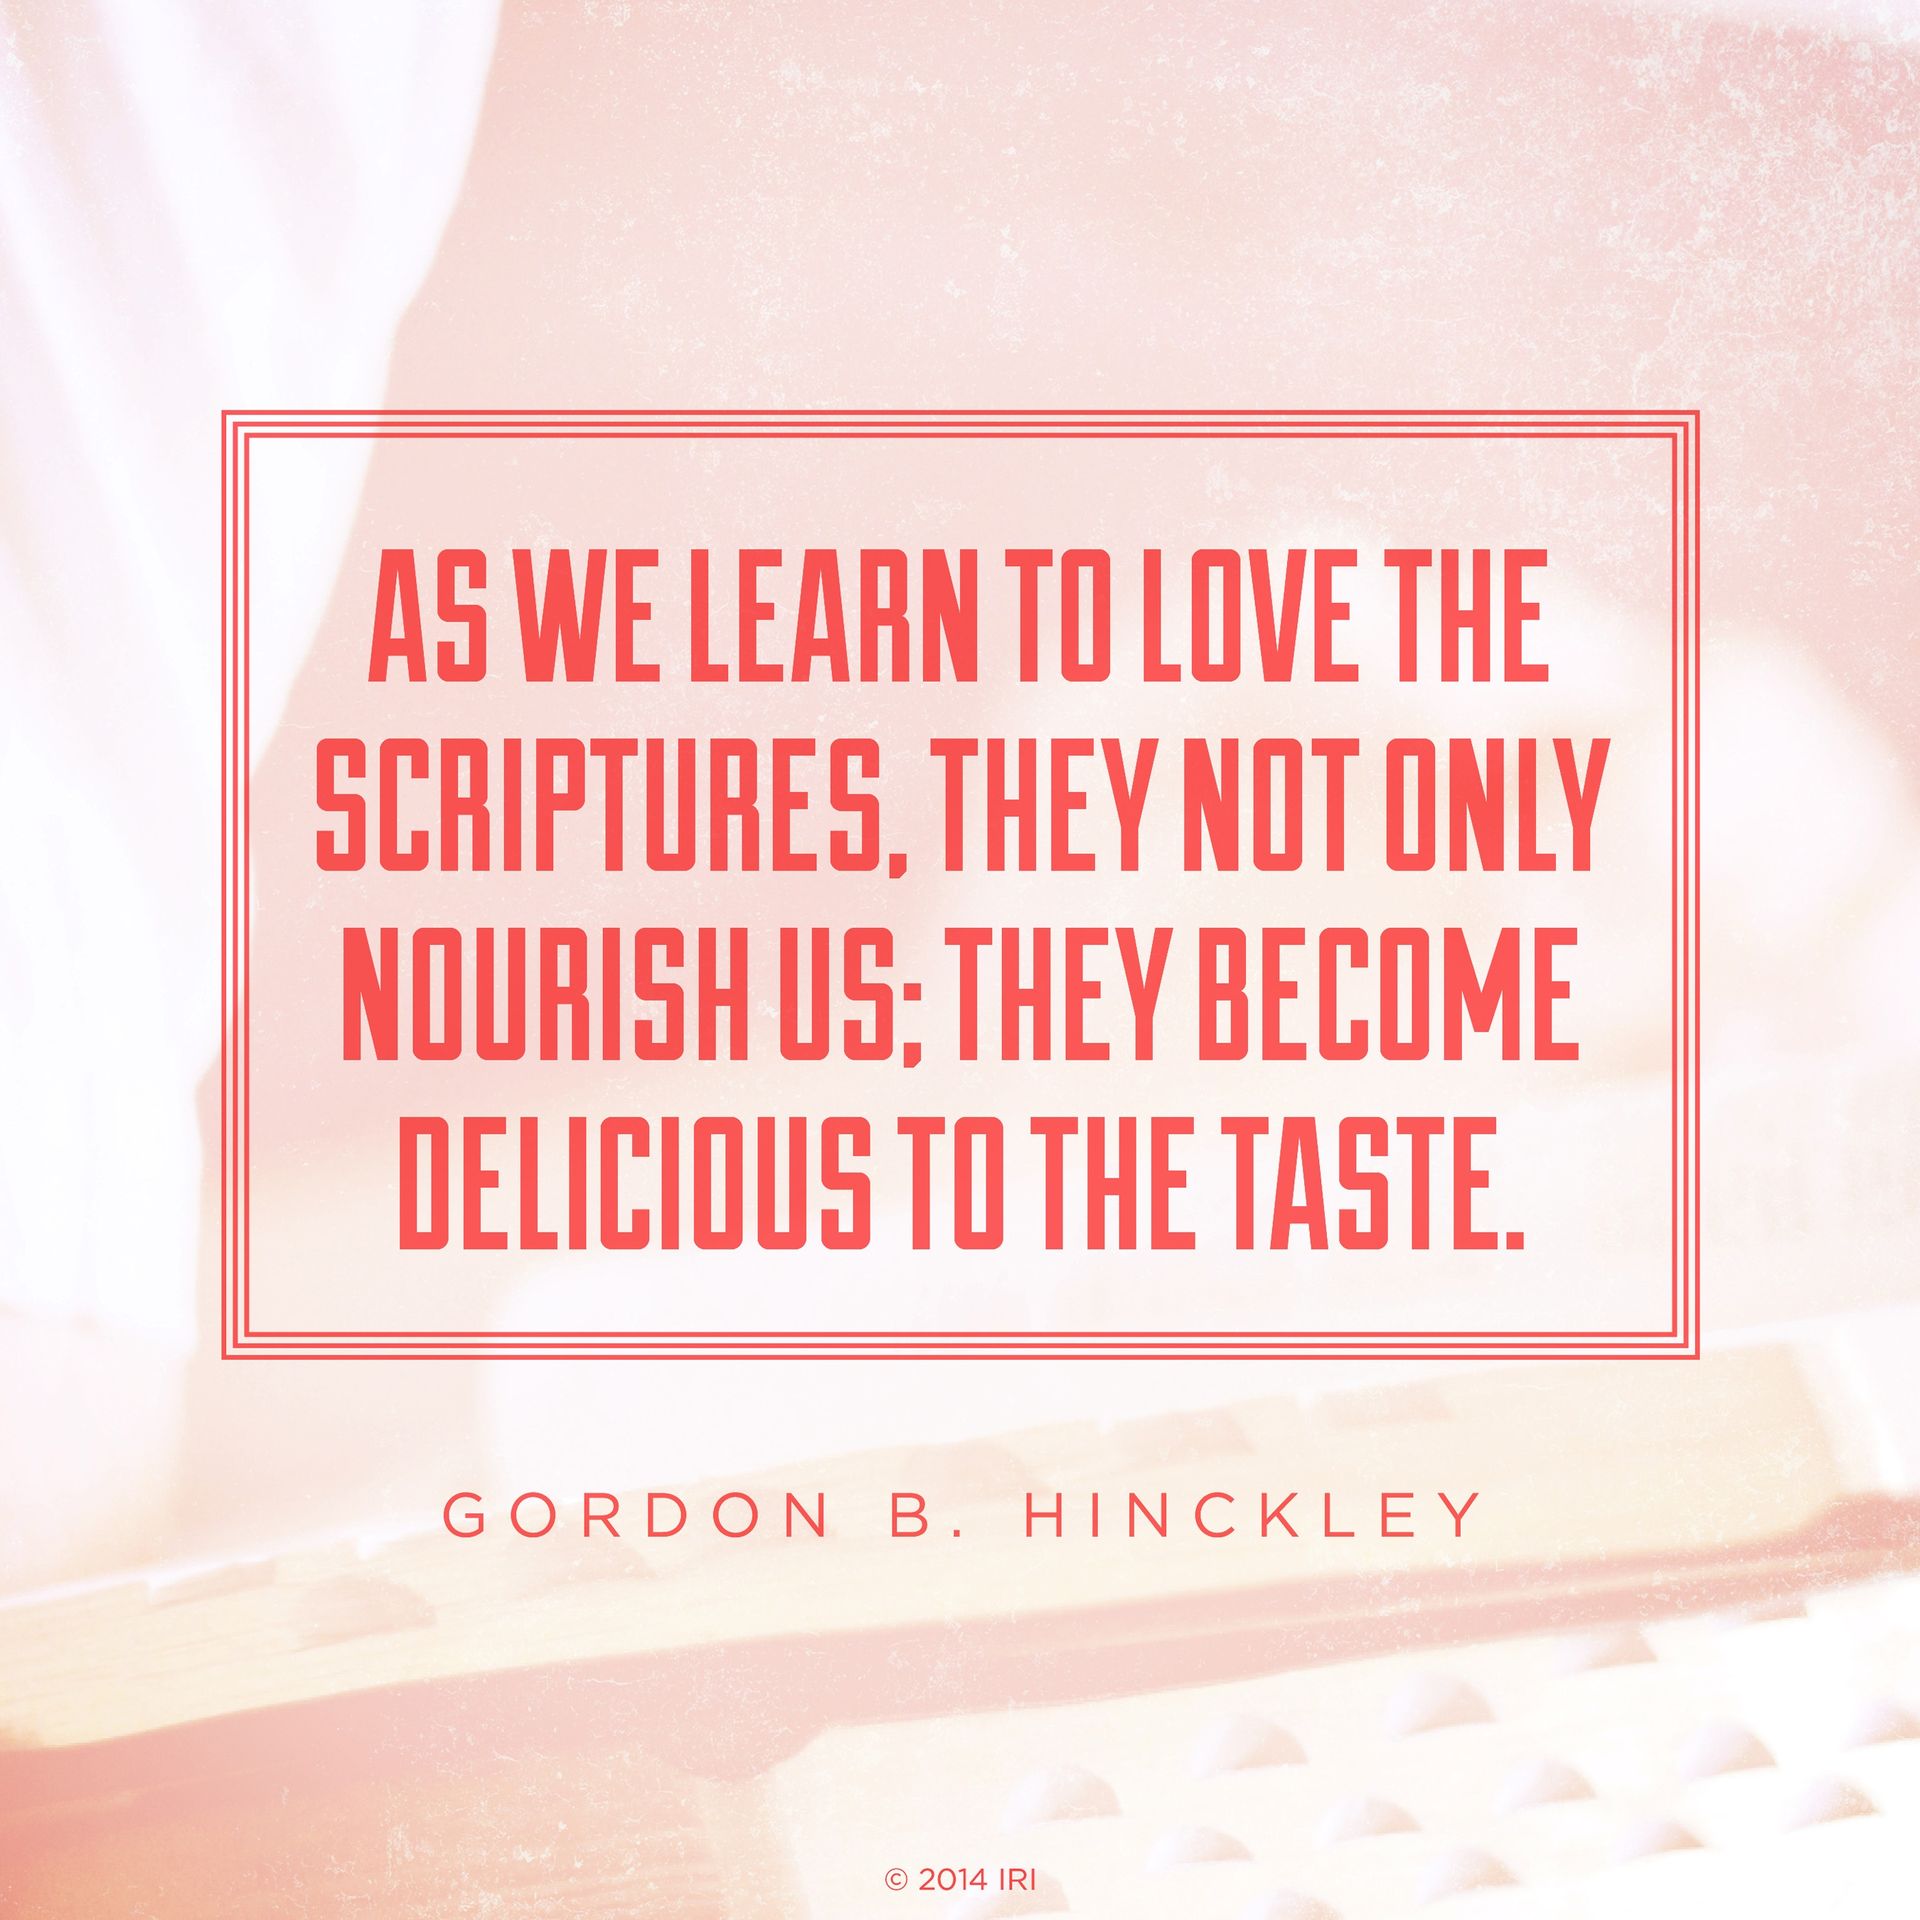 “As we learn to love the scriptures, they not only nourish us; they become delicious to the taste.”—President Gordon B. Hinckley, “Feasting on the Scriptures”